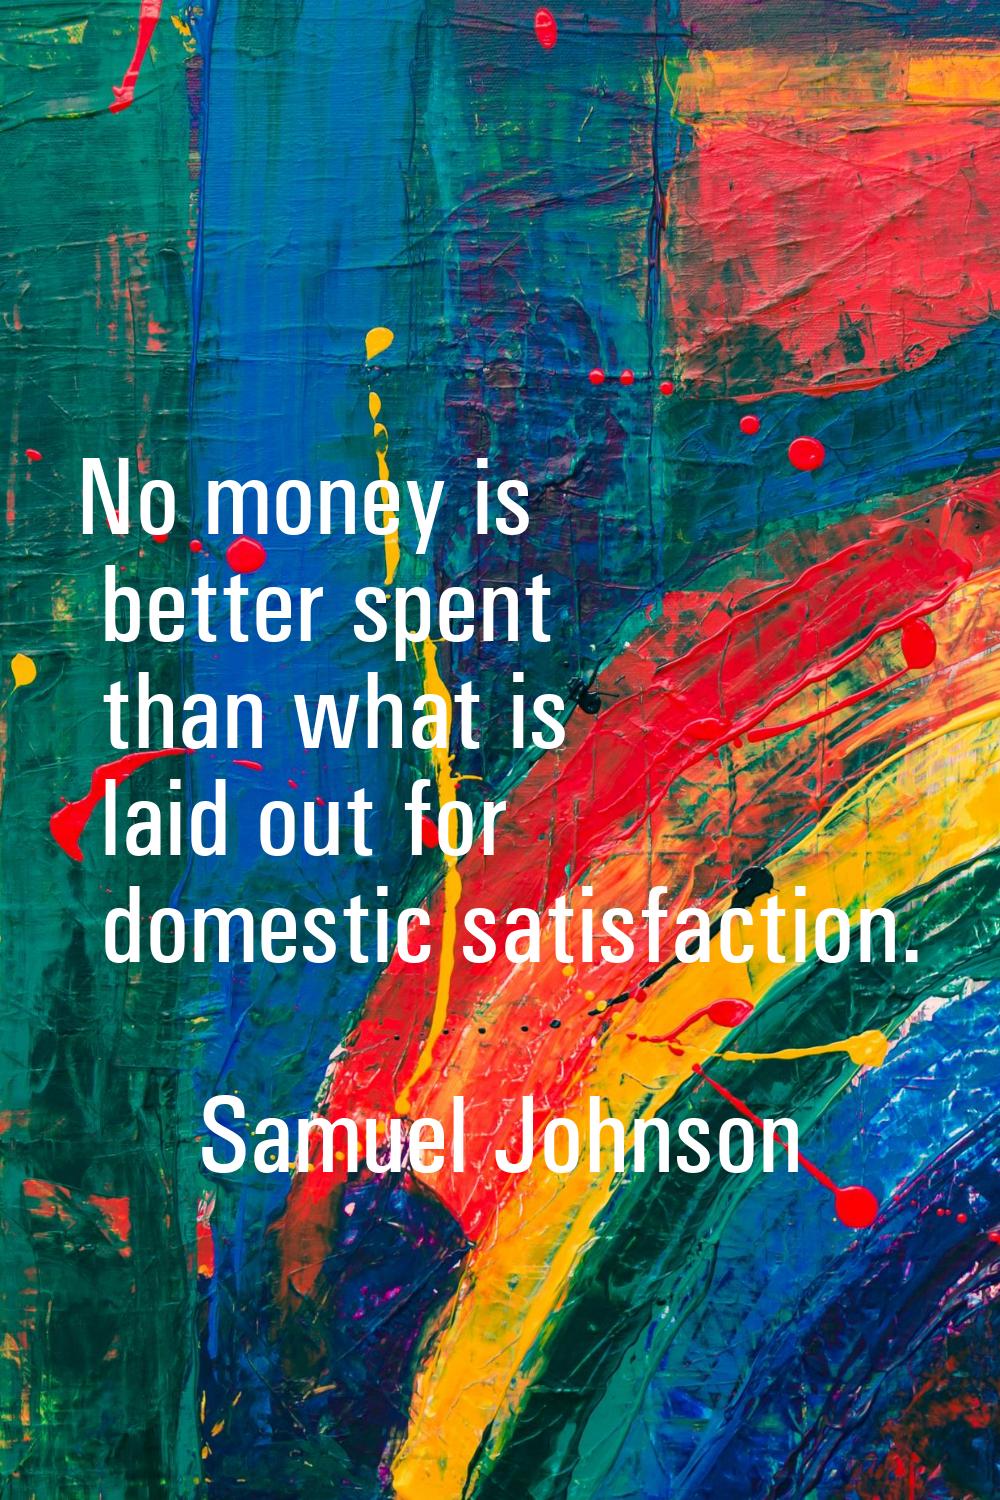 No money is better spent than what is laid out for domestic satisfaction.